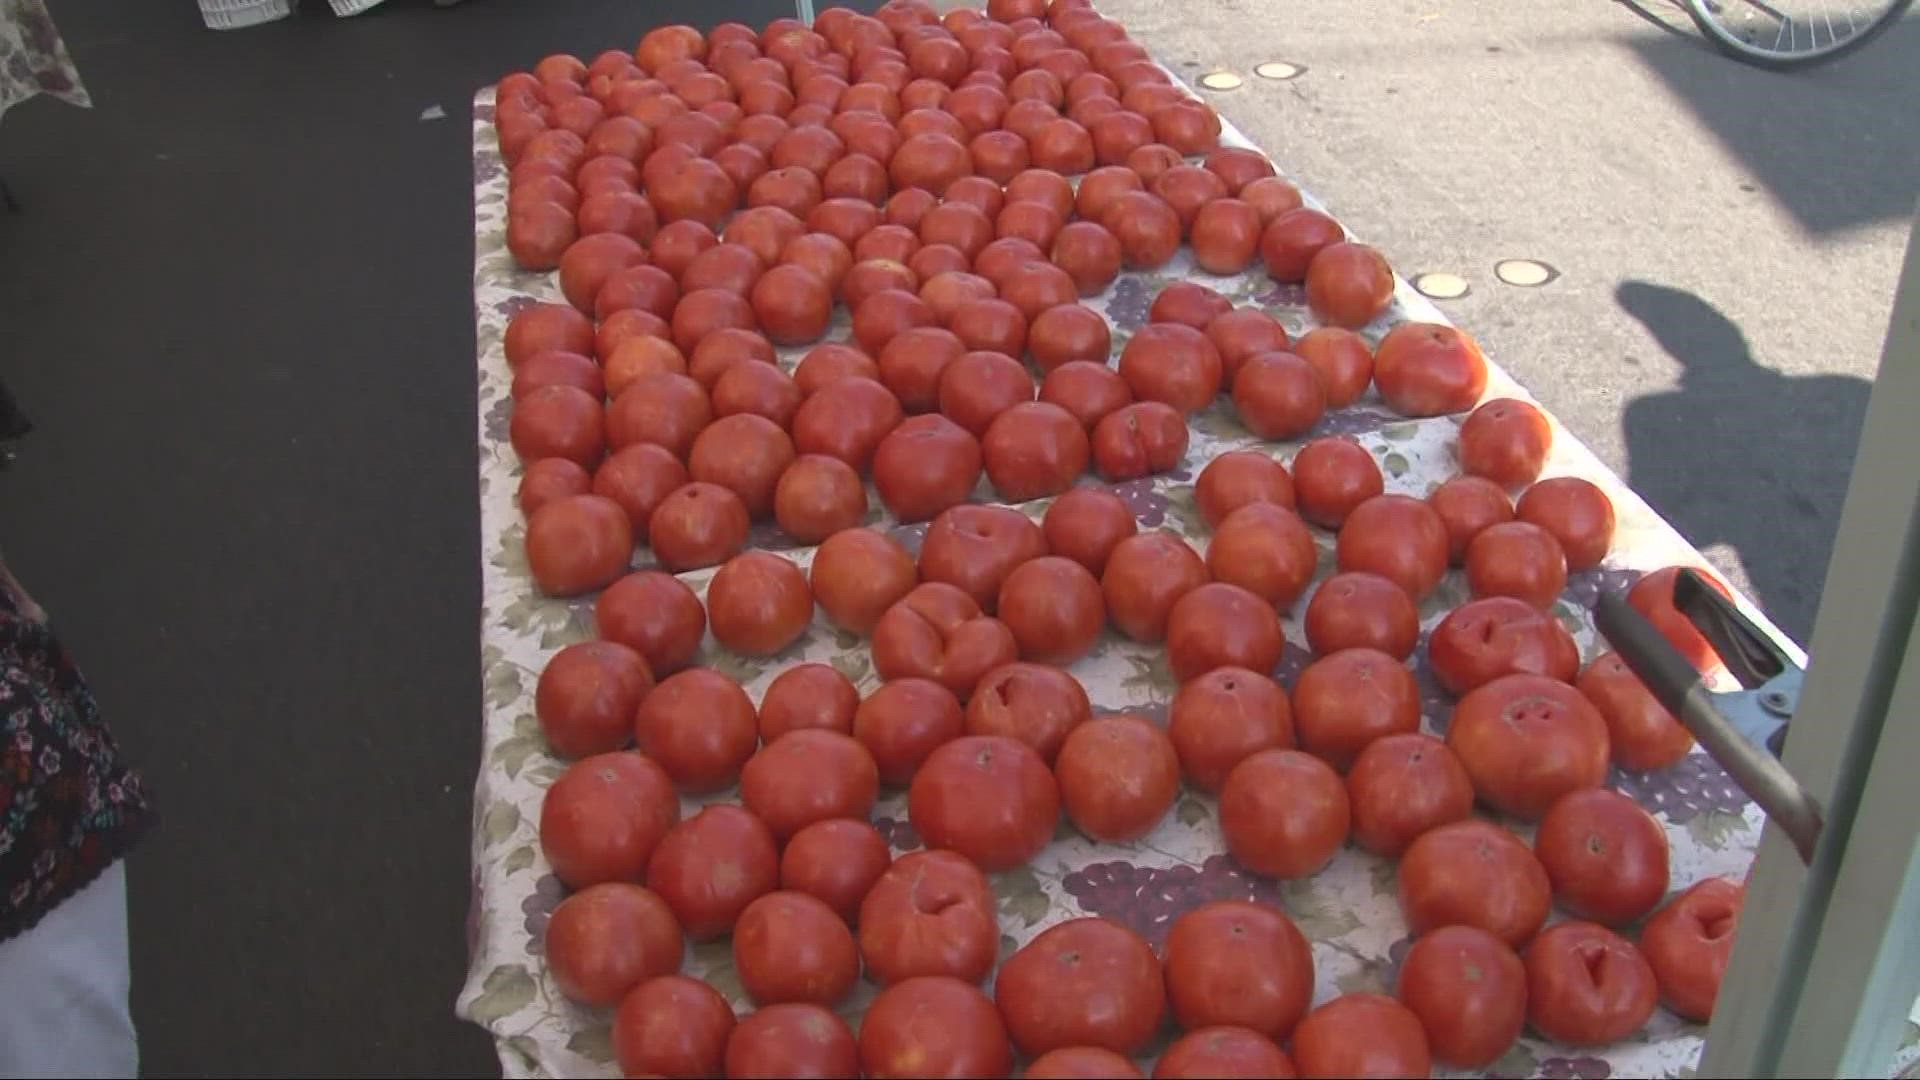 Tomatoes and tomato based items could be in short supply in the coming months because of the worsening drought and water restrictions in California.